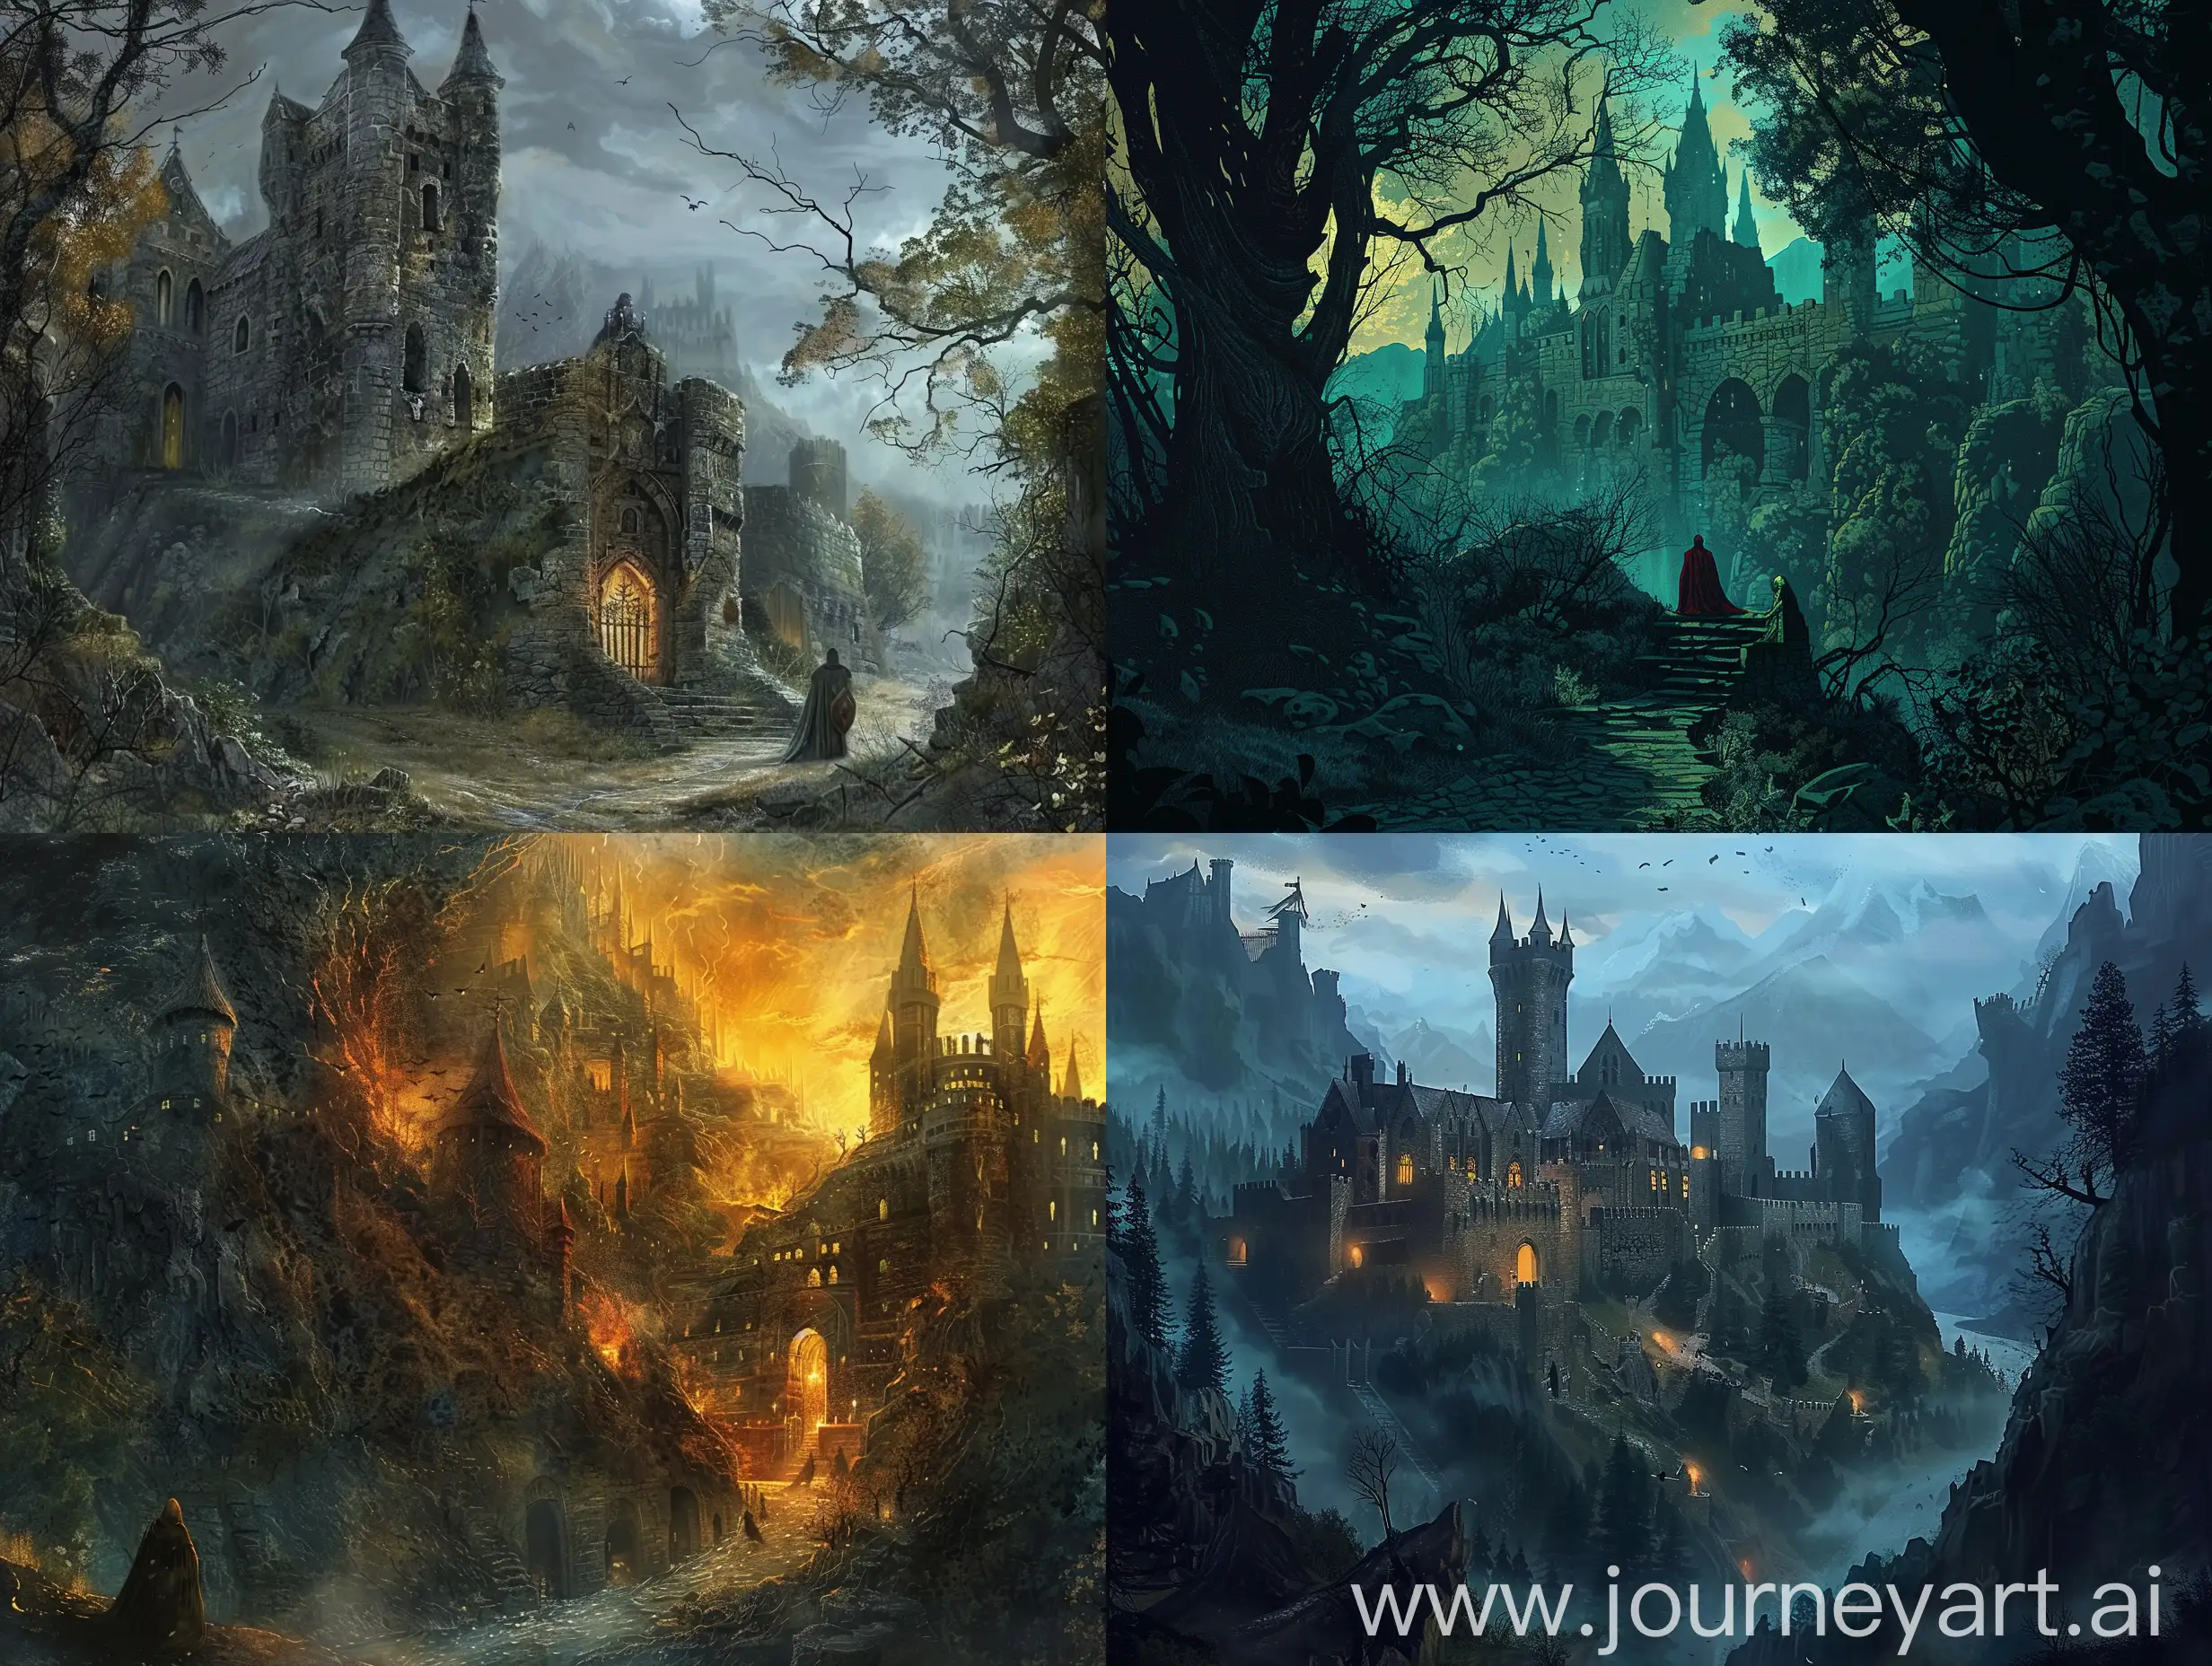 Dark-Medieval-Fantasy-Haunting-Castles-and-Foreboding-Forests